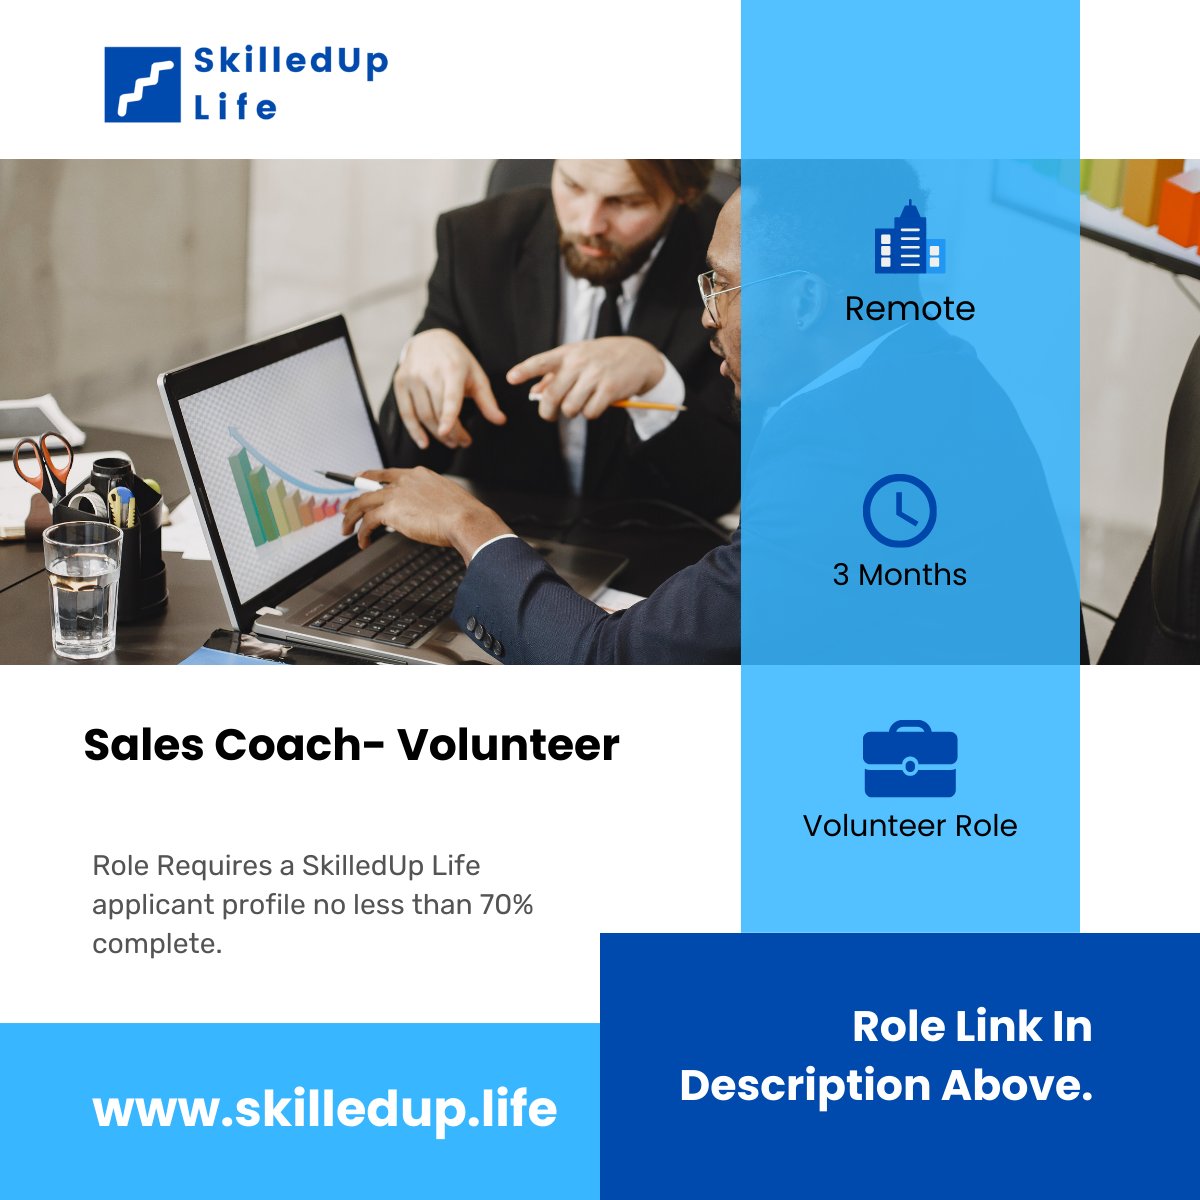 #RemoteVolunteer Opportunity Alert

Looking to make an impact with your sales expertise? Join us at @SkilledUpLife as a Volunteer Sales Coach and help make an impact.Apply today: skilledup.life/opportunity/sk…

#VolunteerOpportunity
#SalesCoach
#LeadershipInAction
#SkilledUpLife